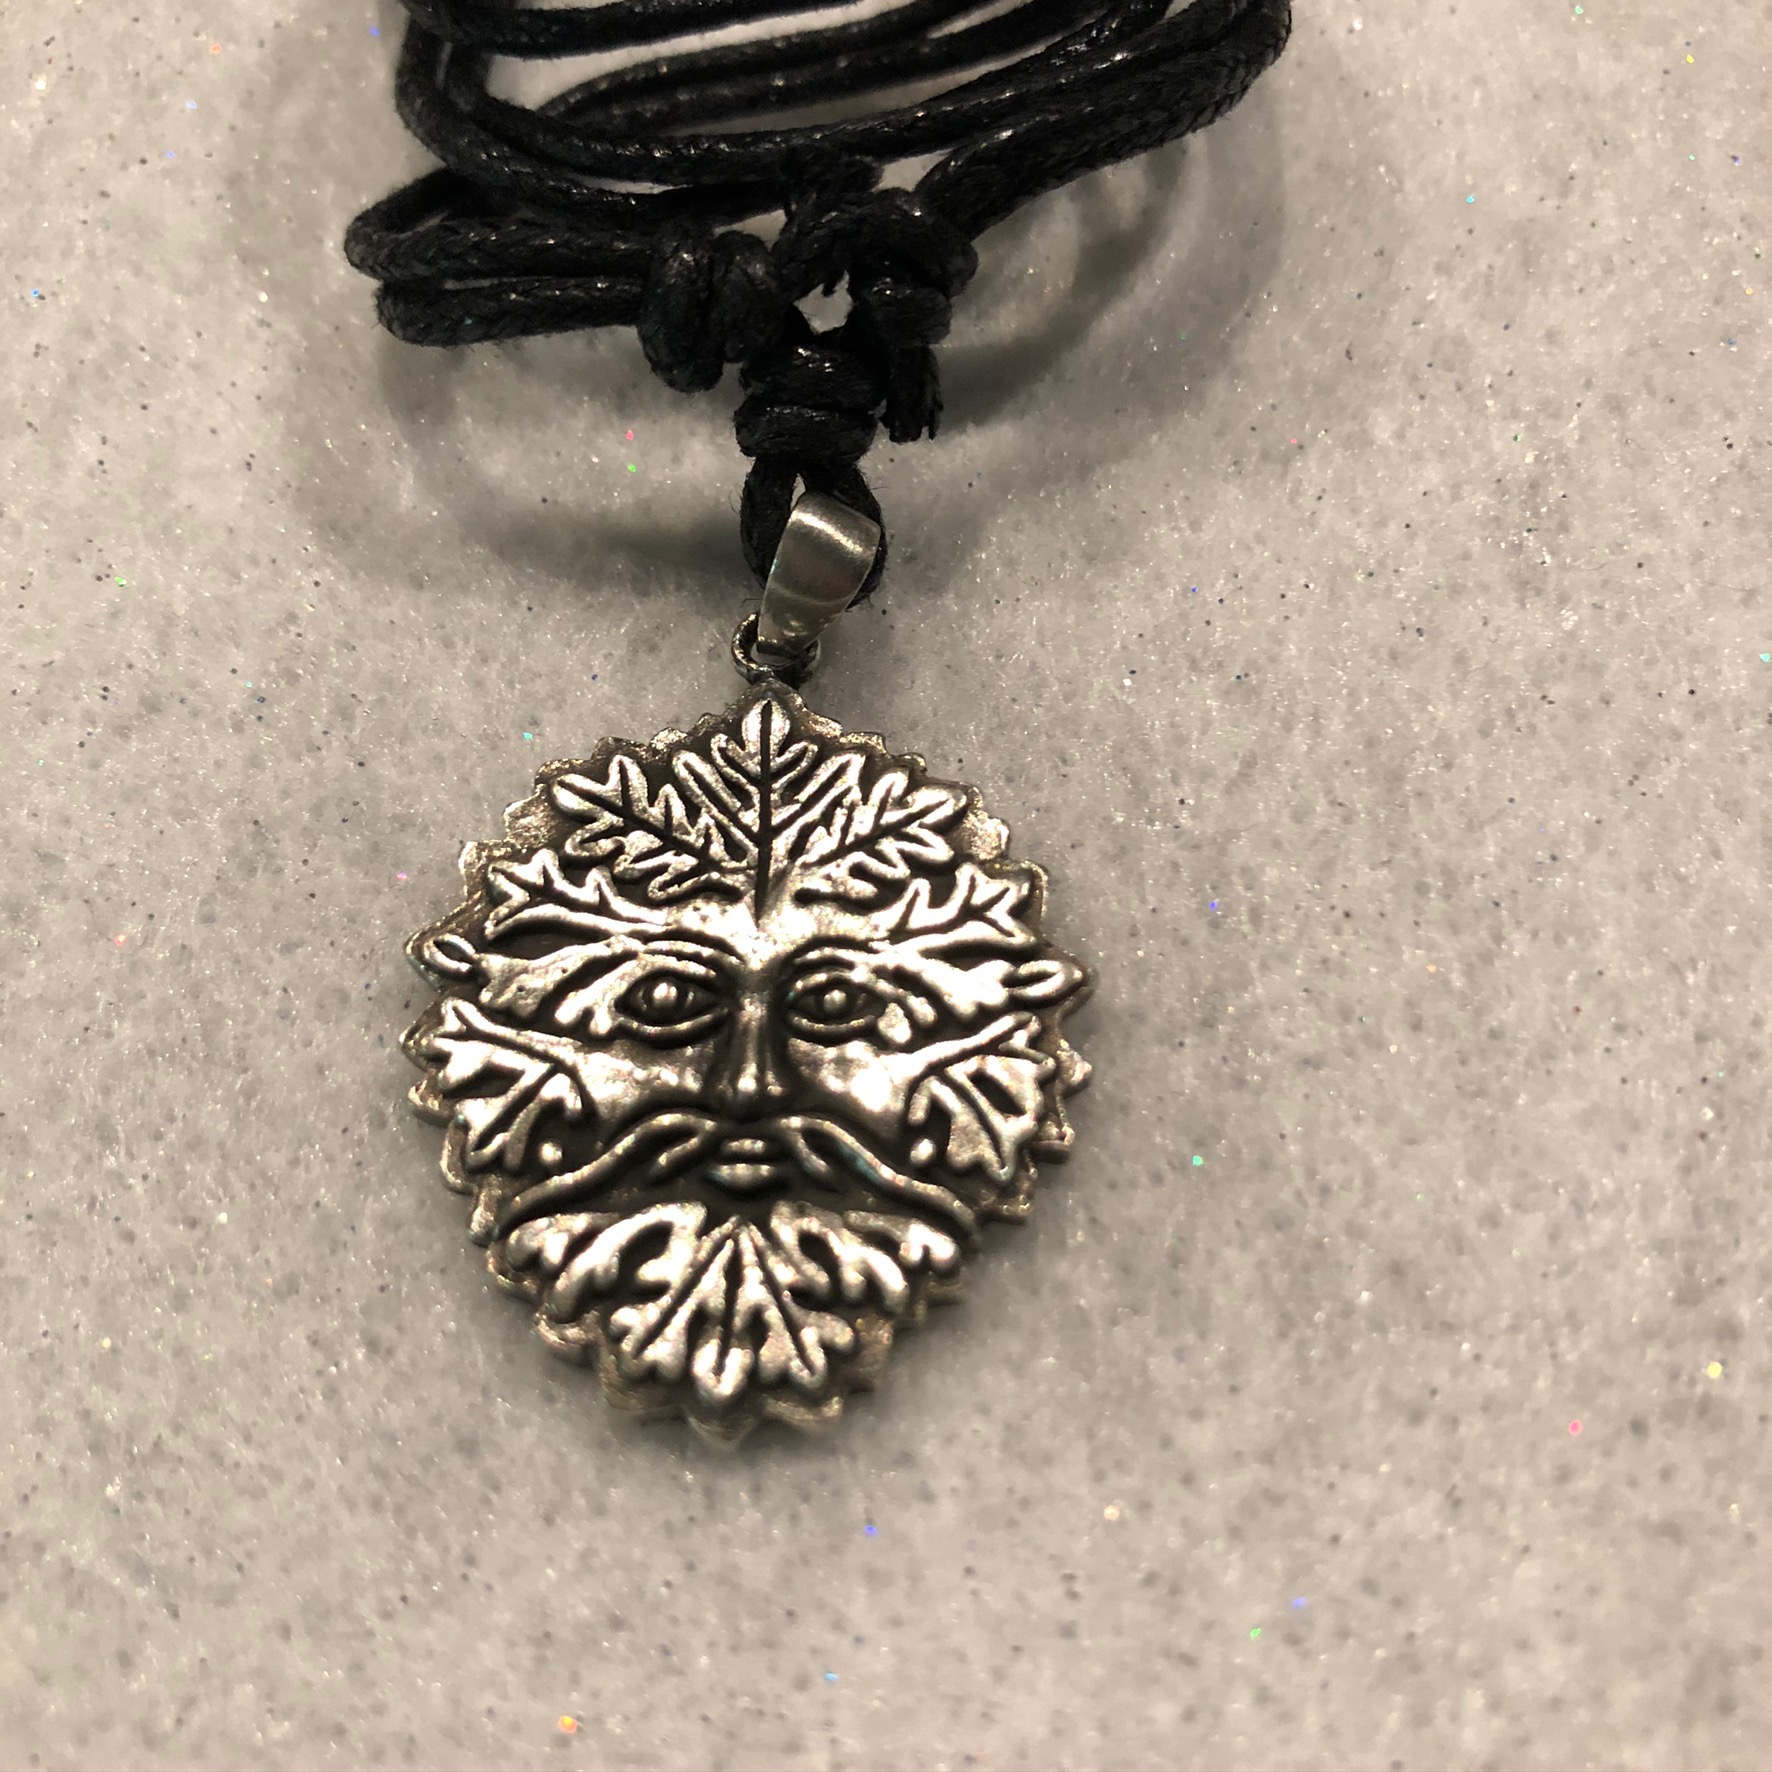 GREEN MAN Pendant Necklace Jewelry HARMONY with Nature Pewter Amulet Talisman 